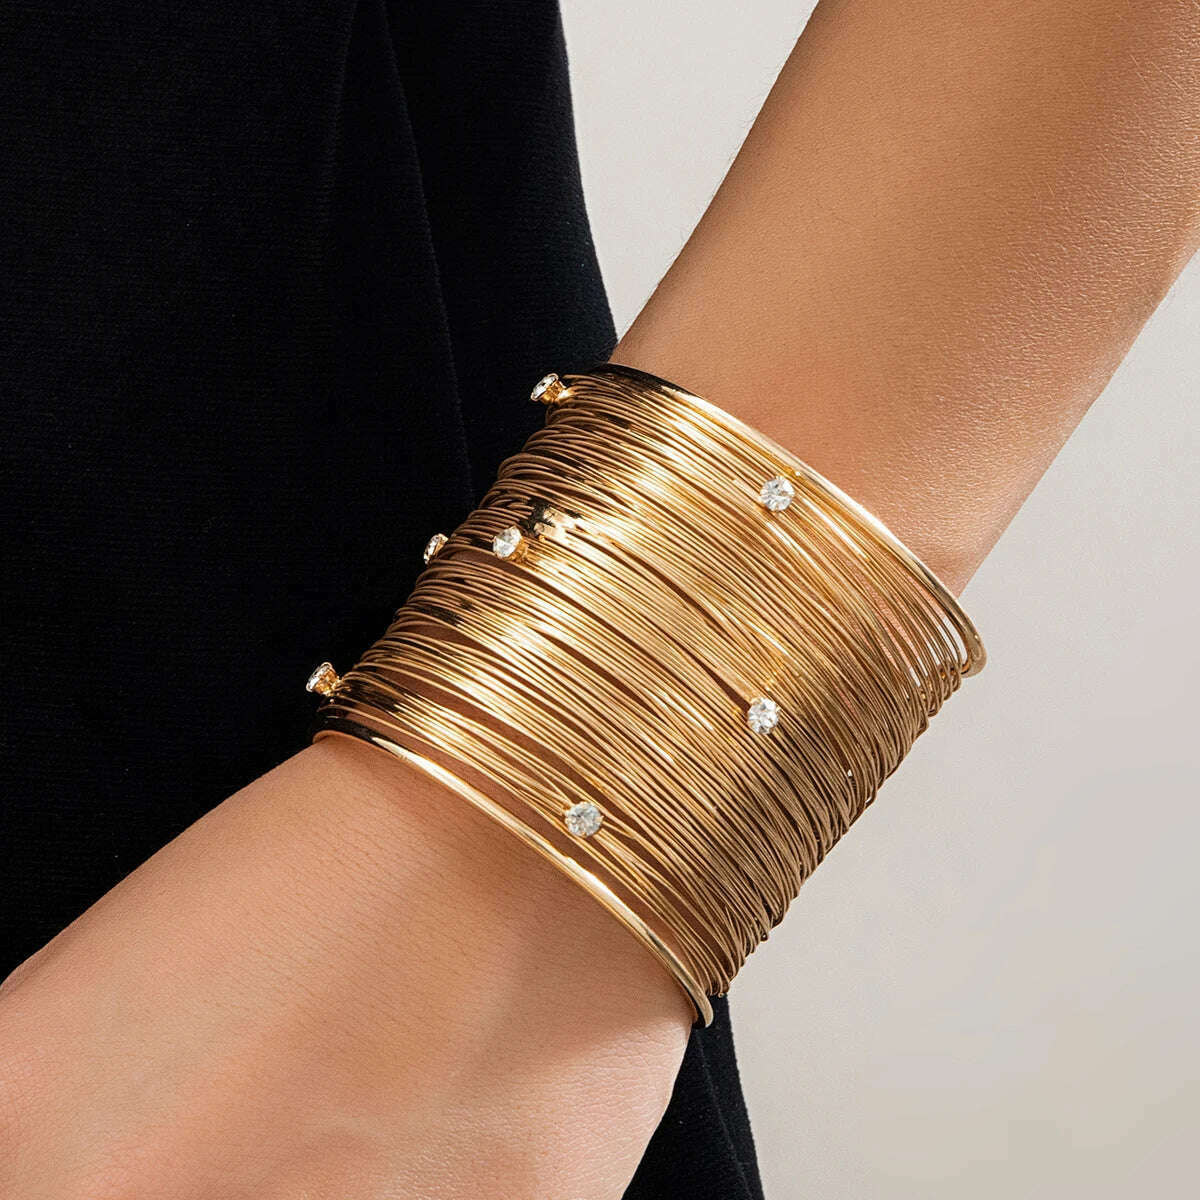 KIMLUD, Multilayer Metal Wires Strings Open Cuff Bangles for Women Exaggerated Punk Rhinestone Arm Bracelet Grunge Jewelry Steampunk Men, Gold Color, KIMLUD Womens Clothes